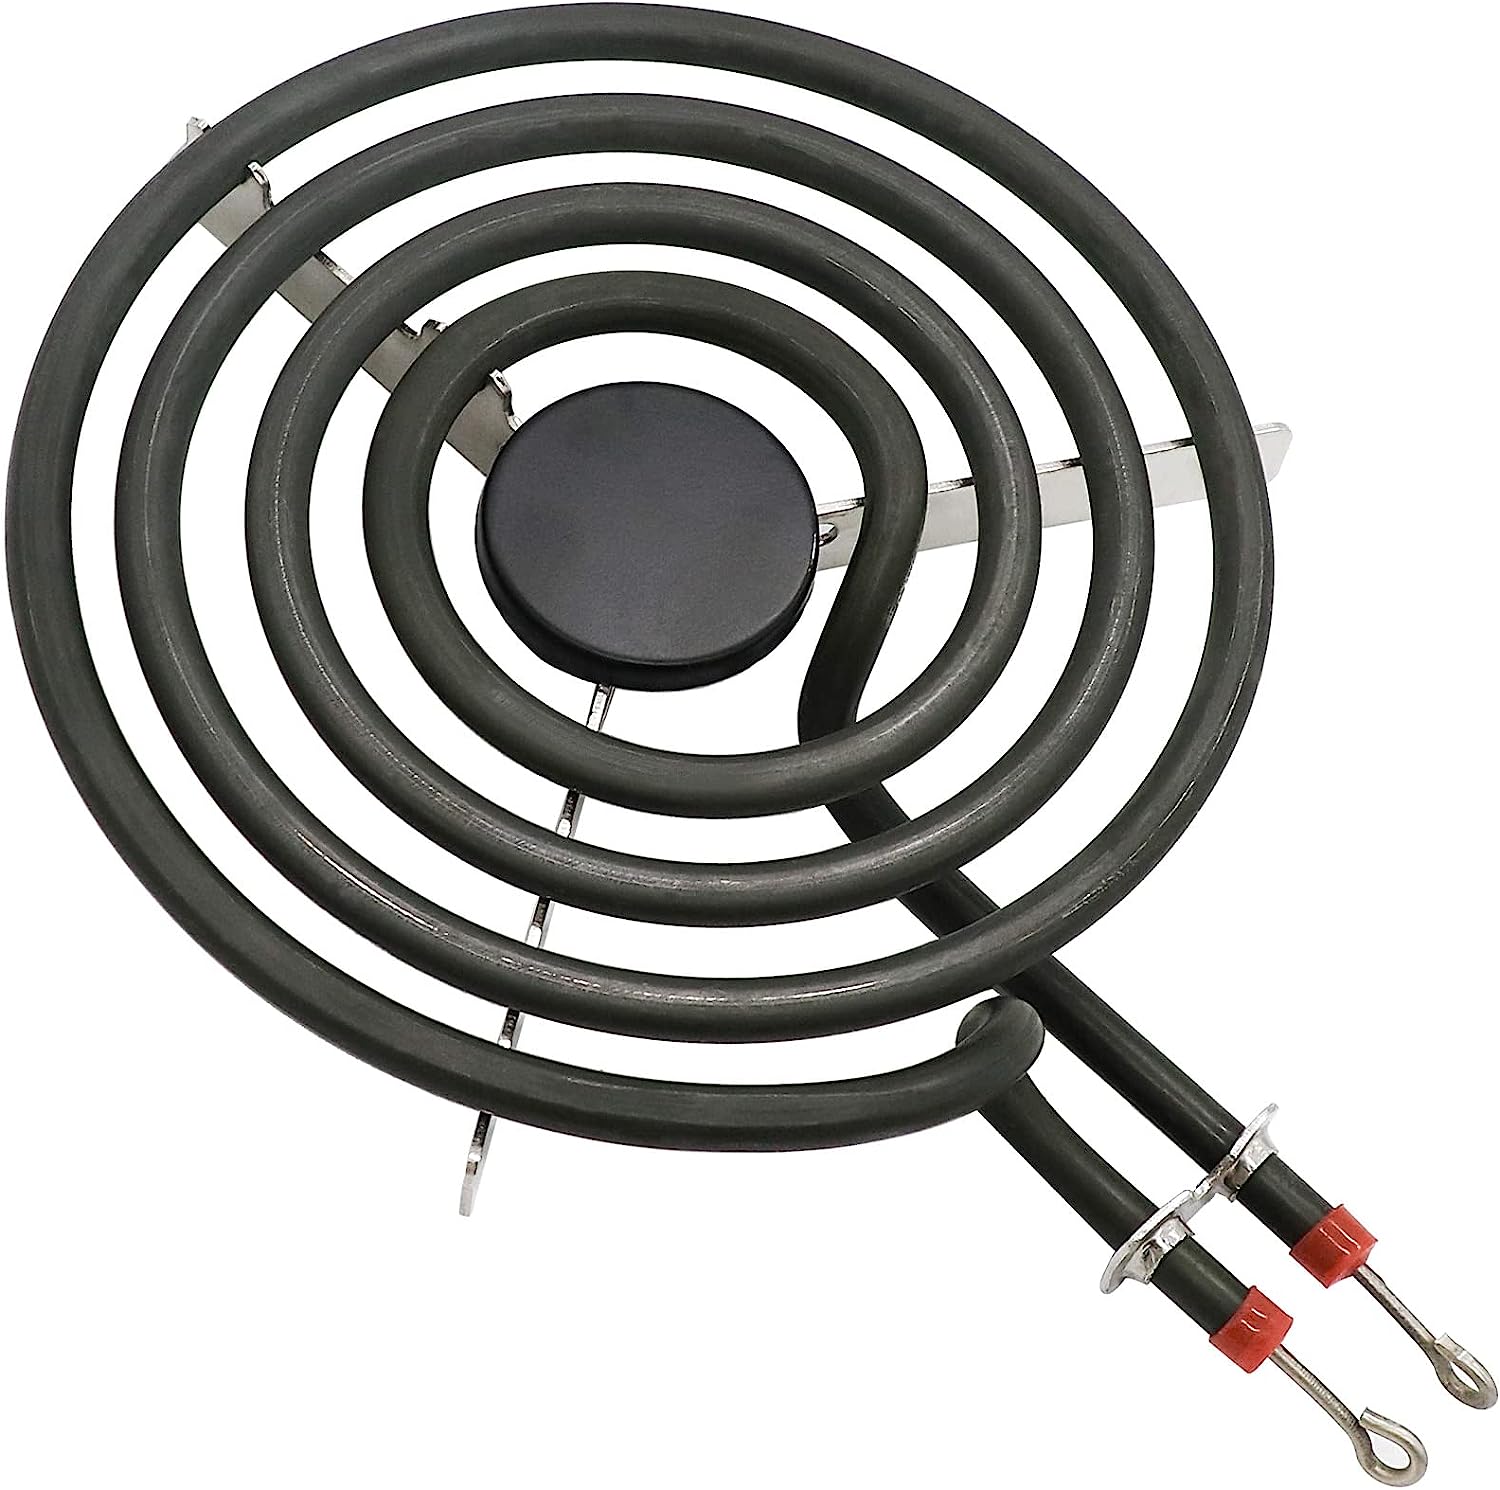 SP21YA Electric Stove Burner Replacement for G.E & [...]